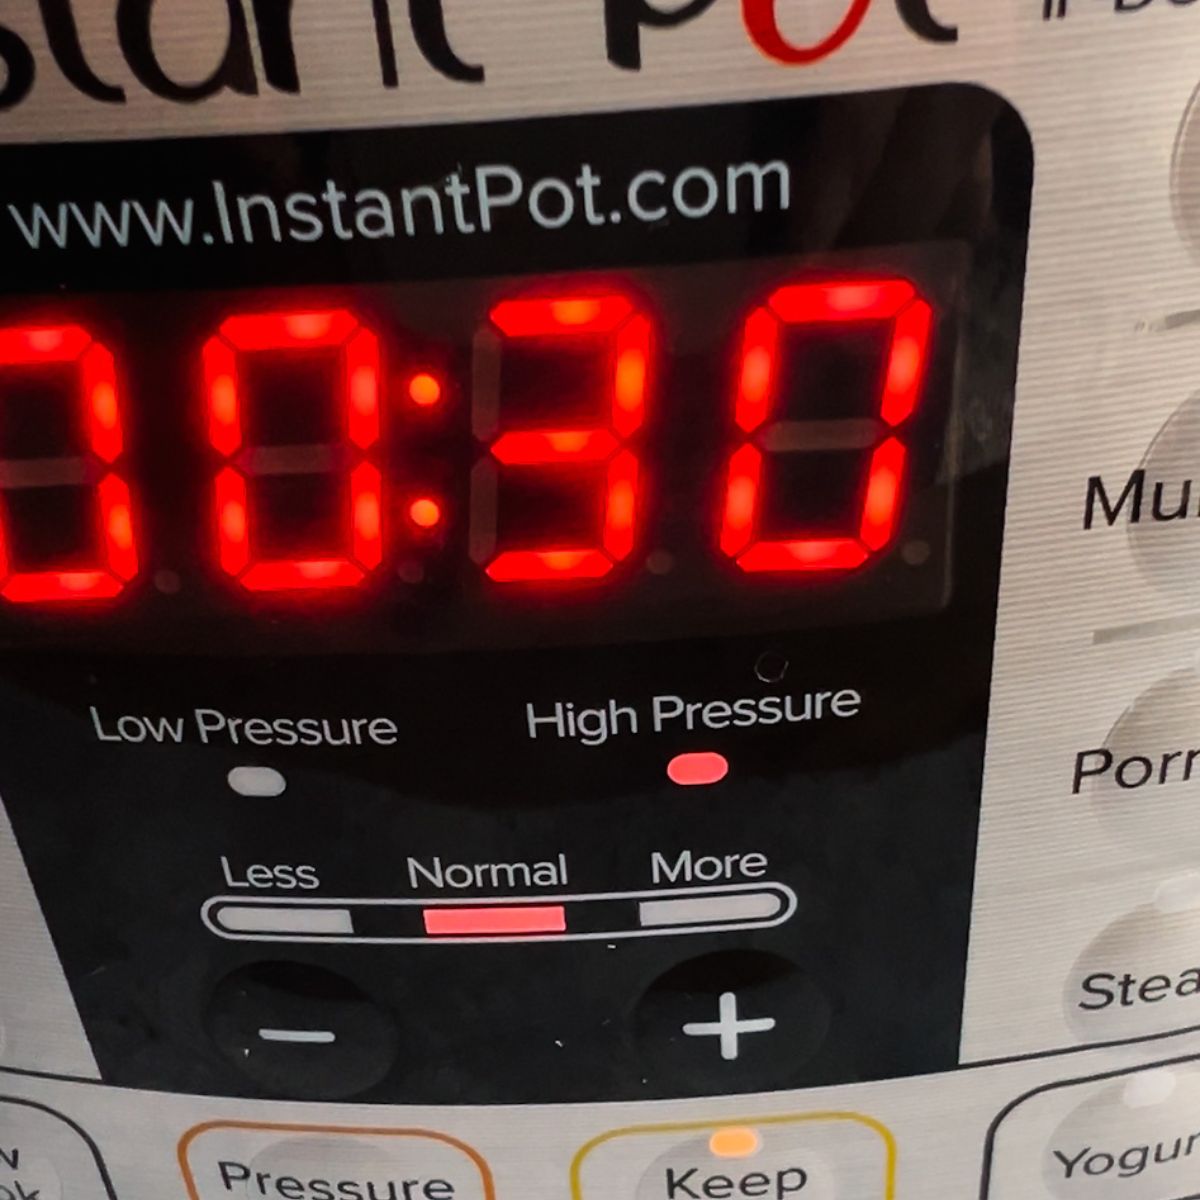 Instant Pot showing a cook time of 30 minutes.